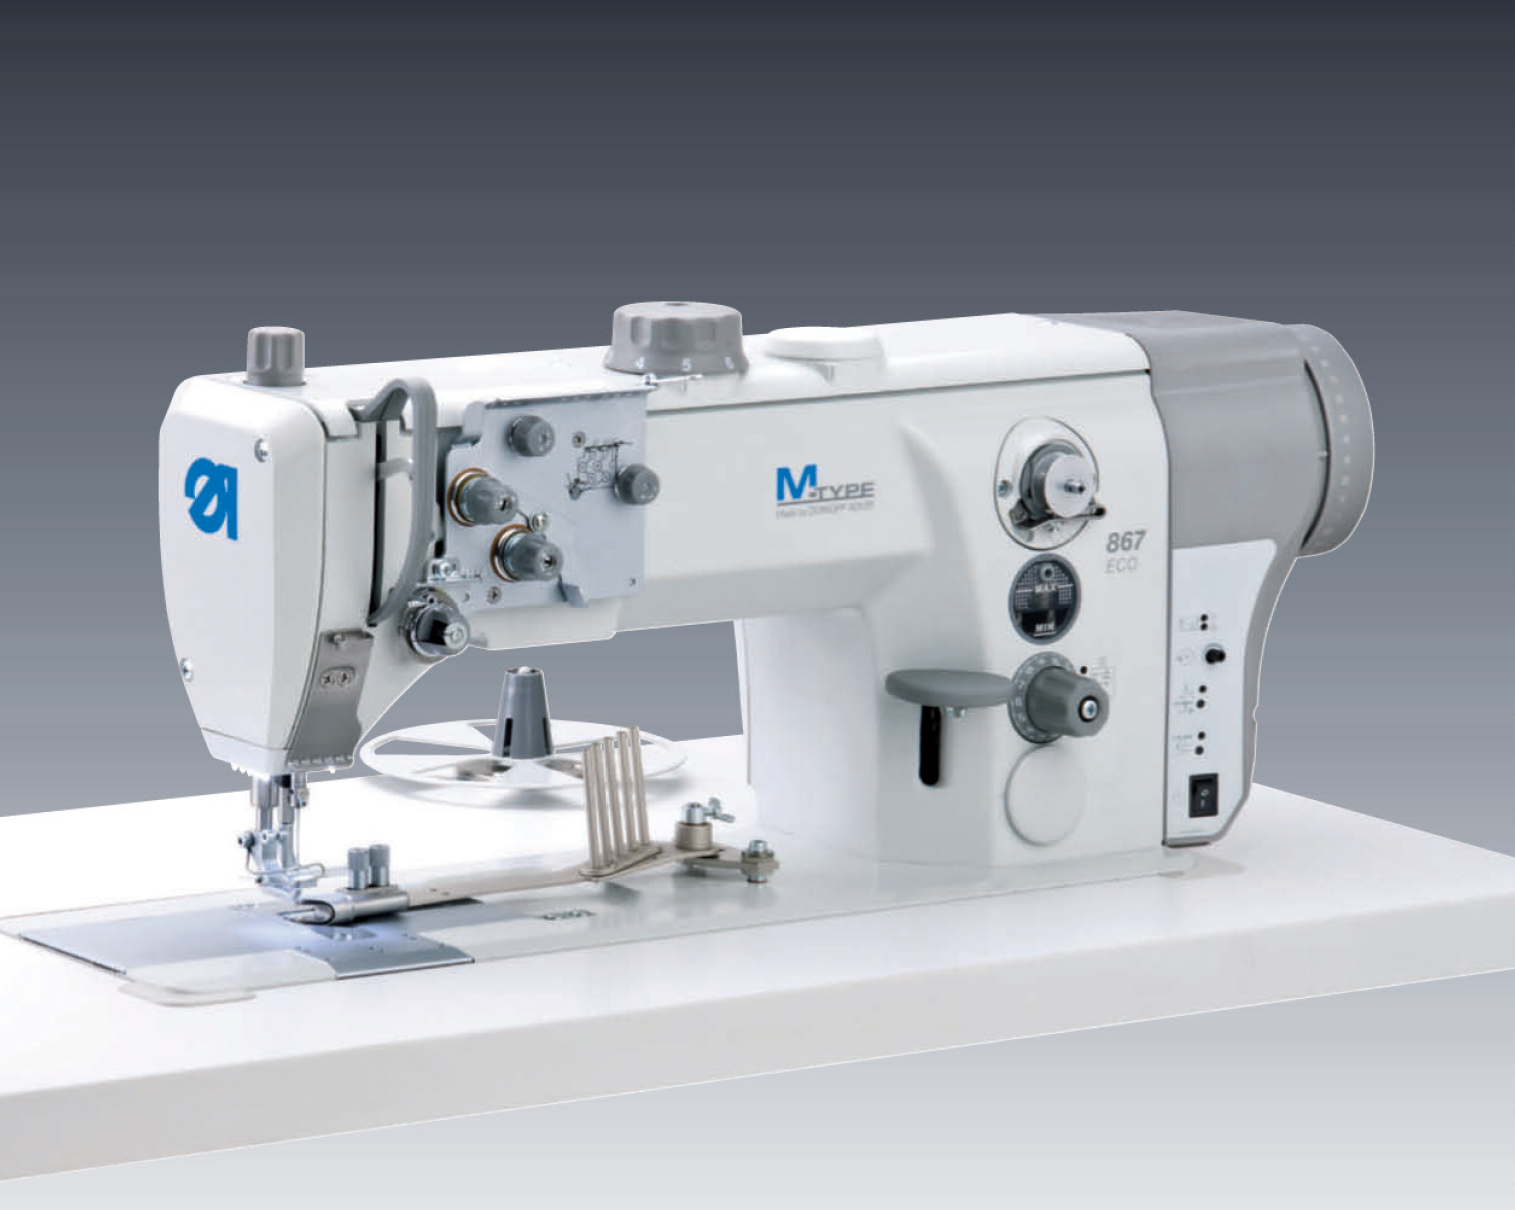 M-TYPE 867-M ECO LG - With moving binding device